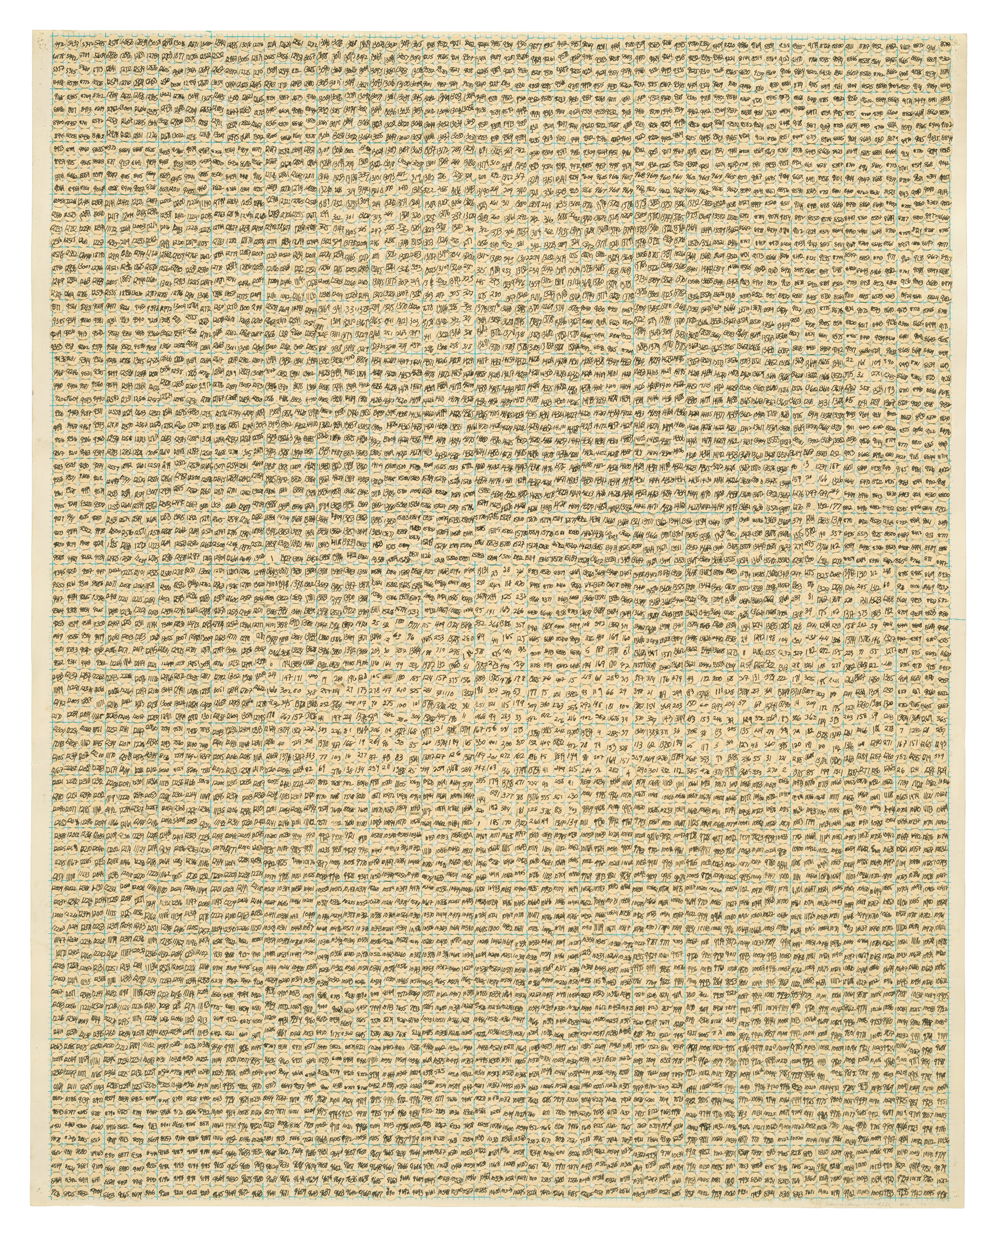 <em>Untitled #4</em>, 1973. Ink and paper collage on paper, dimensions 22.25 × 17.6 inches. Museum of Modern Art, New York.